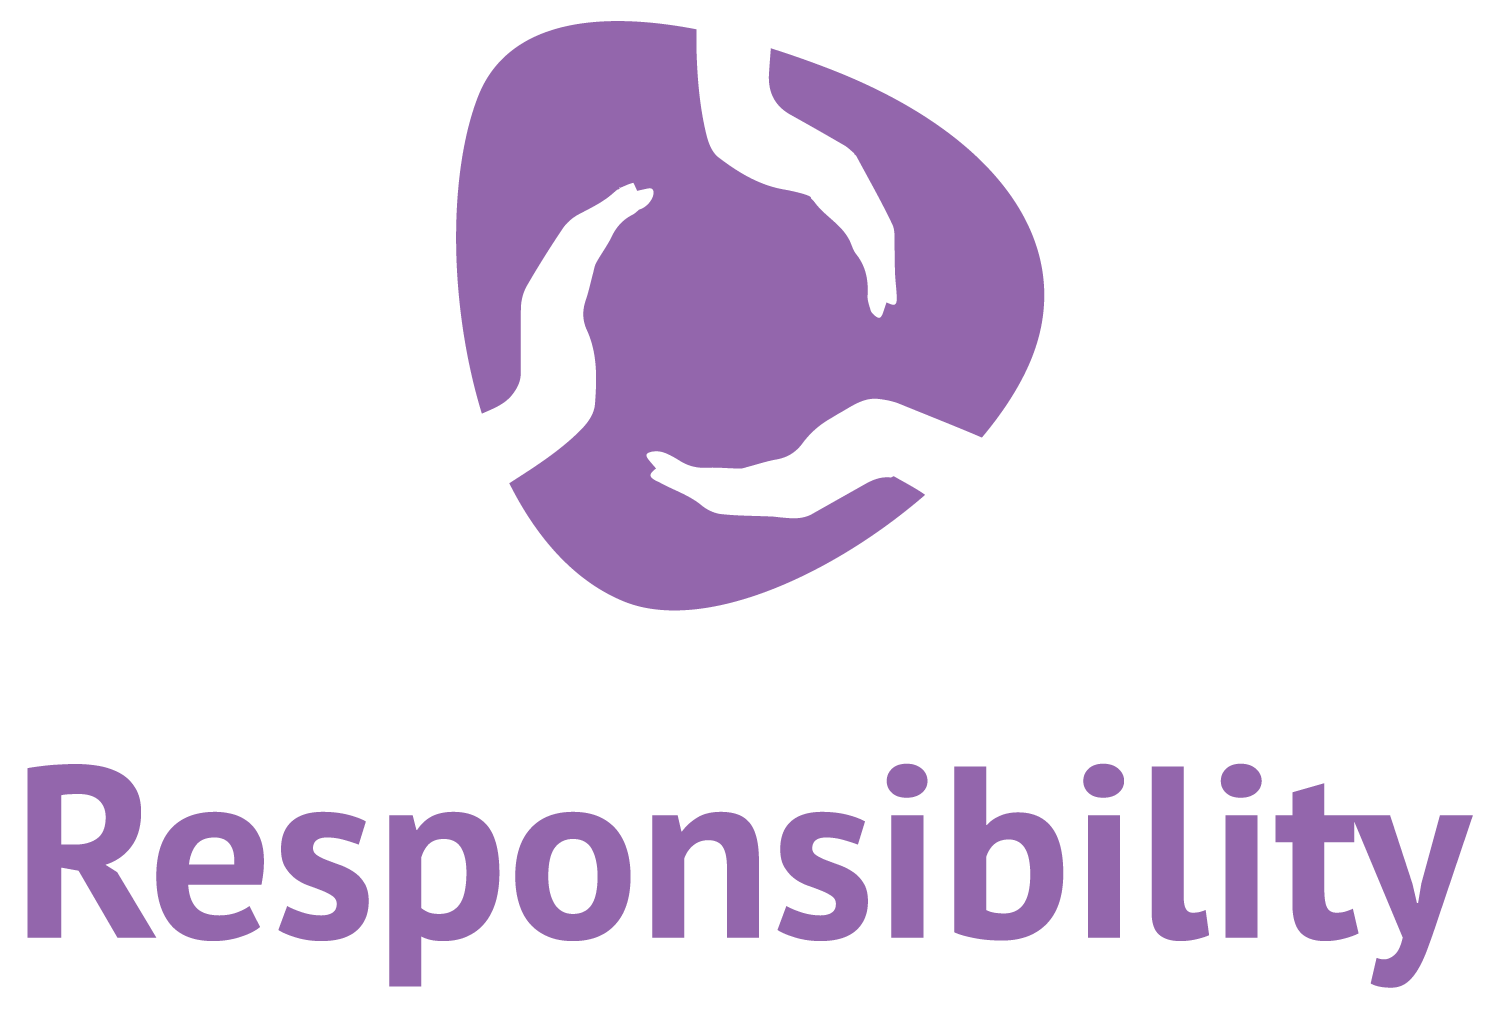 why is responsibility an important value